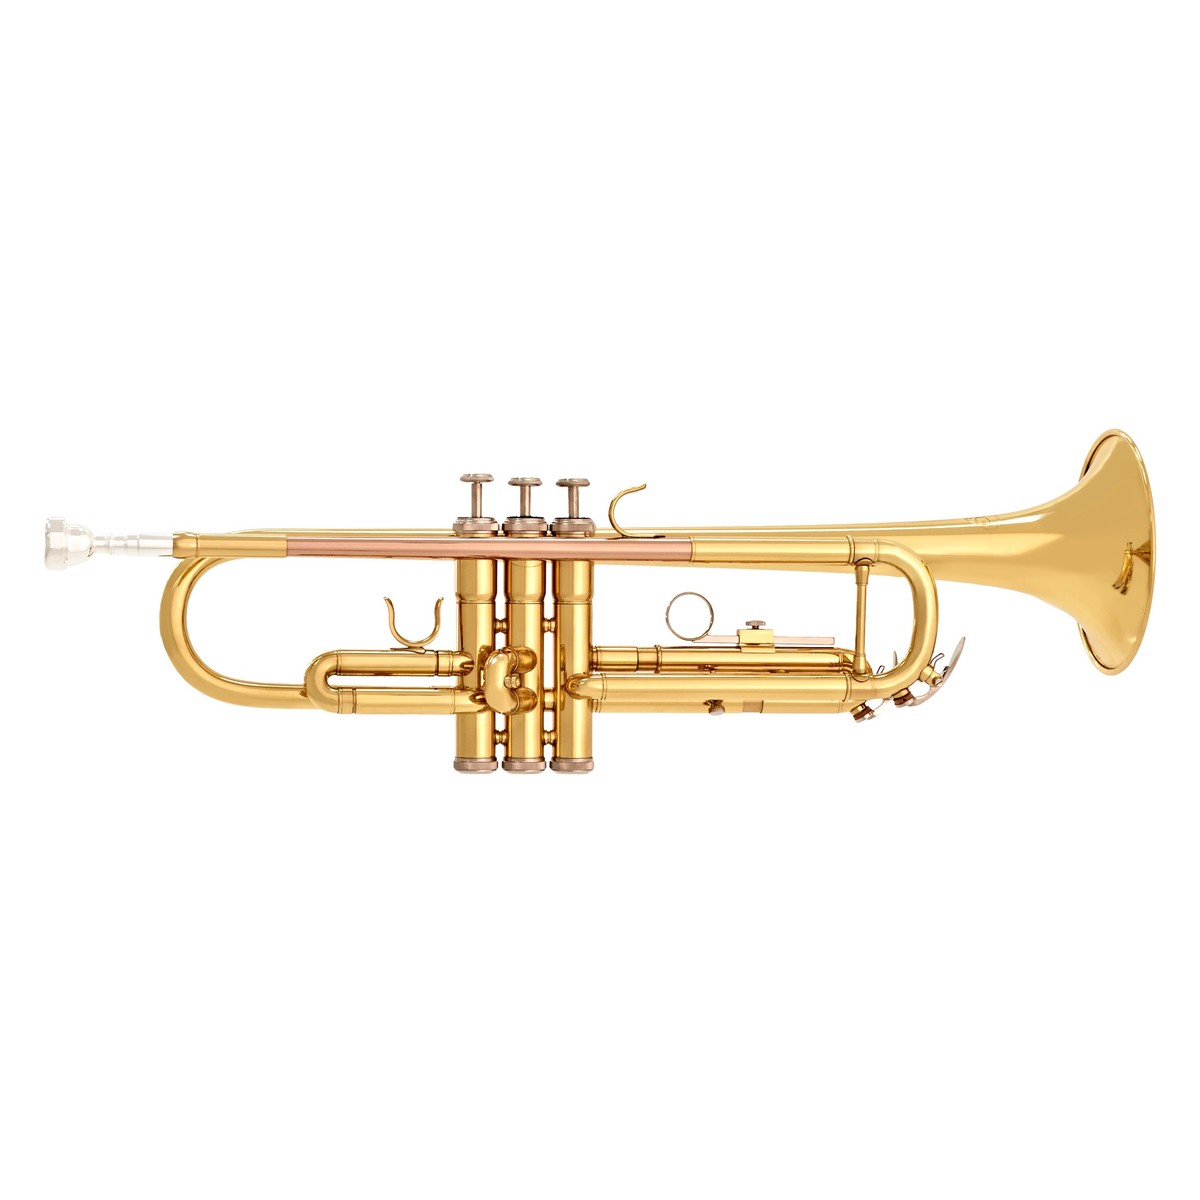 Odyssey OTR140 Debut Trumpet with Case